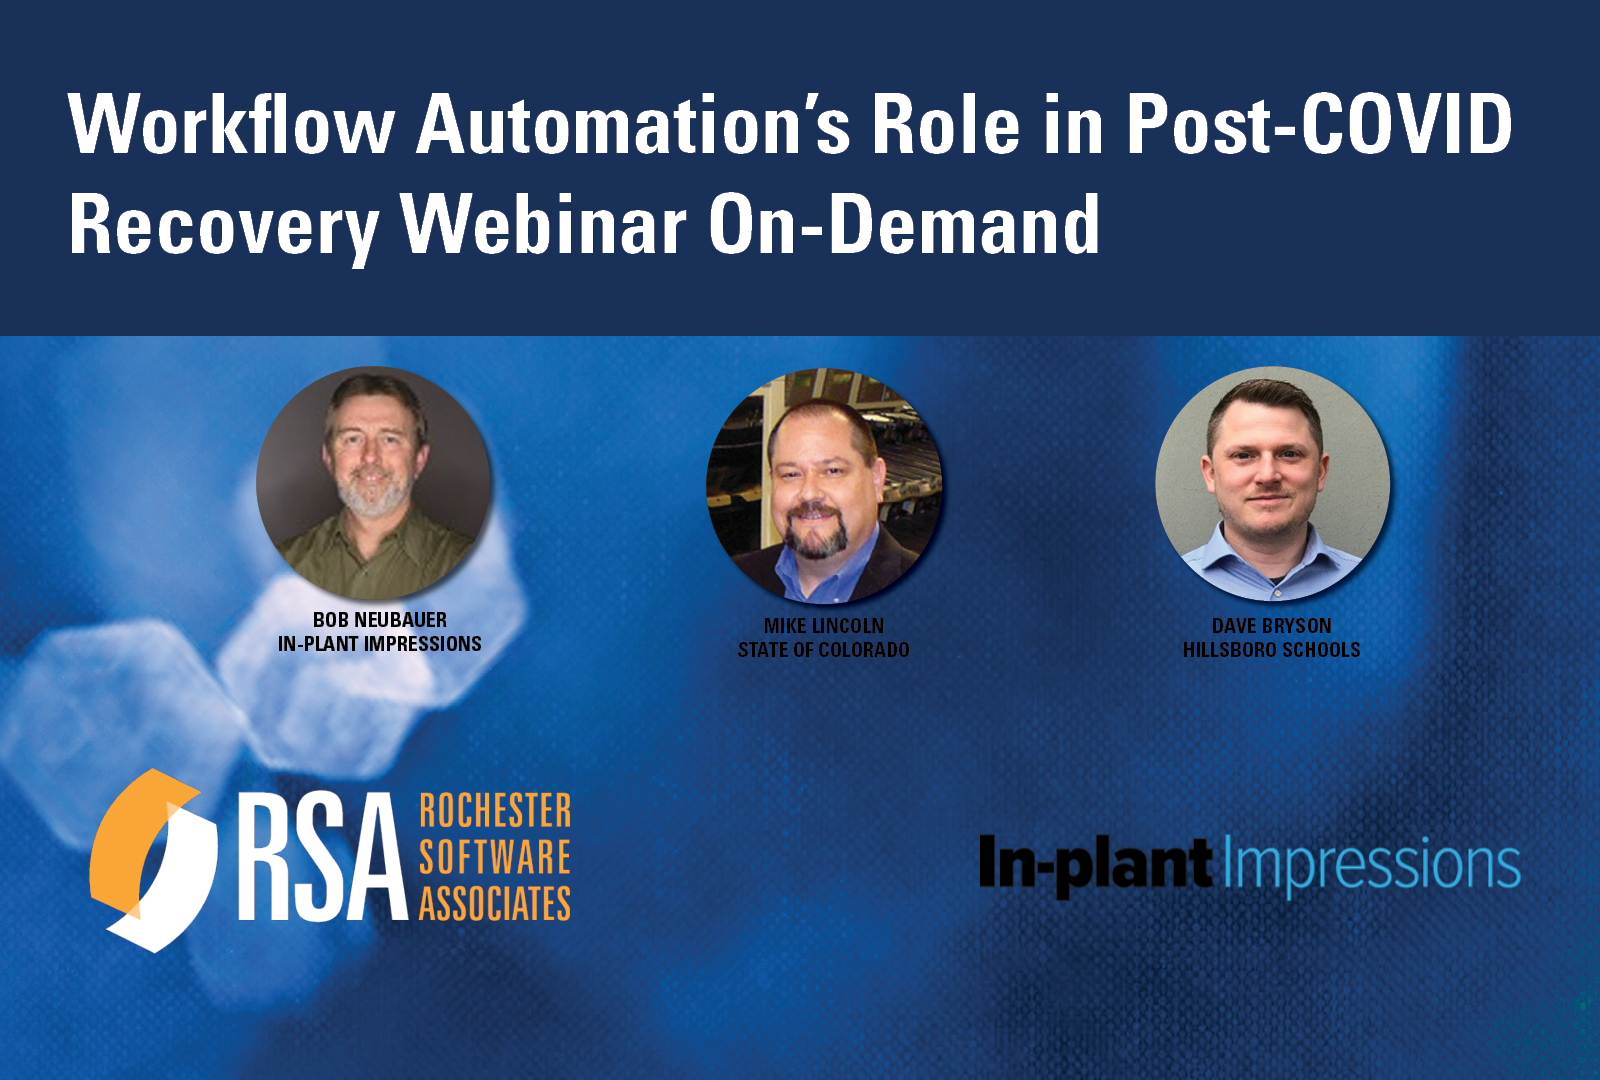 Workflow automations role in post-covid recovery webinar image